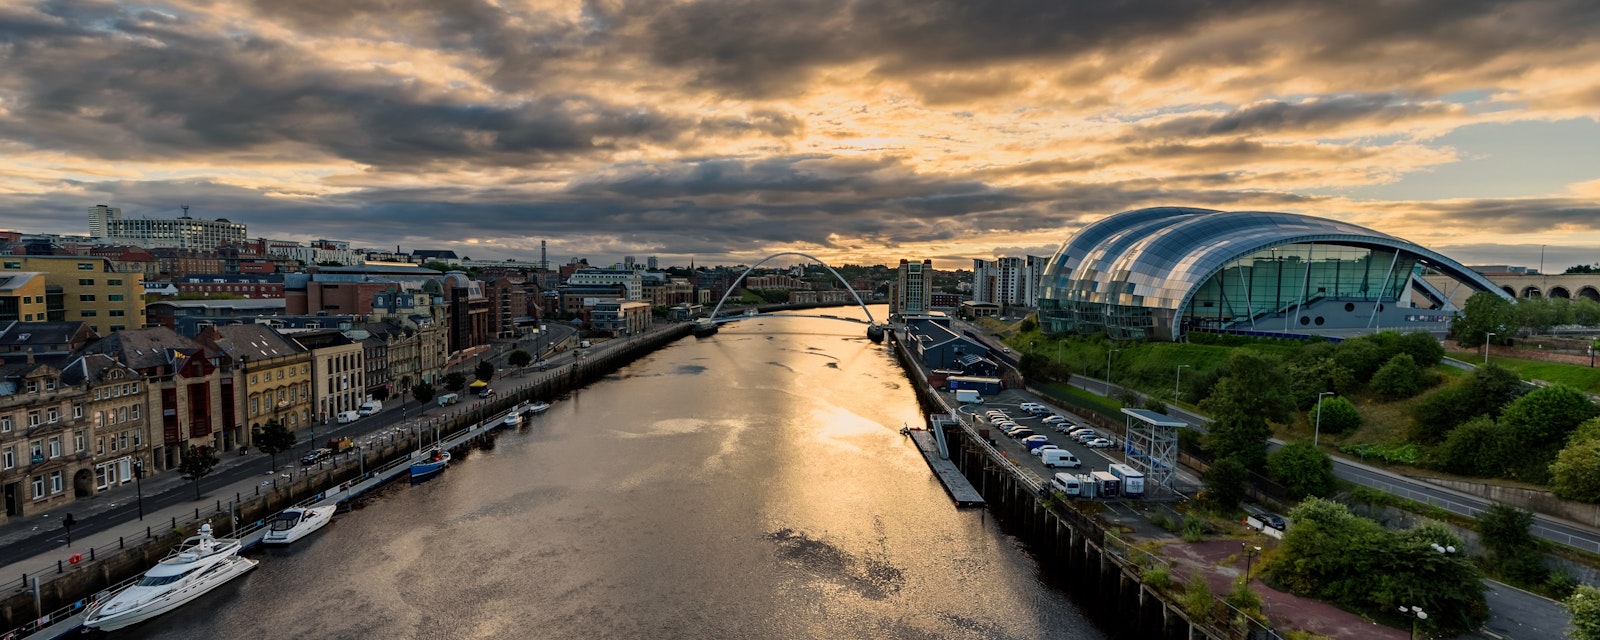 Newcastle,Upon,Tyne,Is,A,University,City,On,The,River